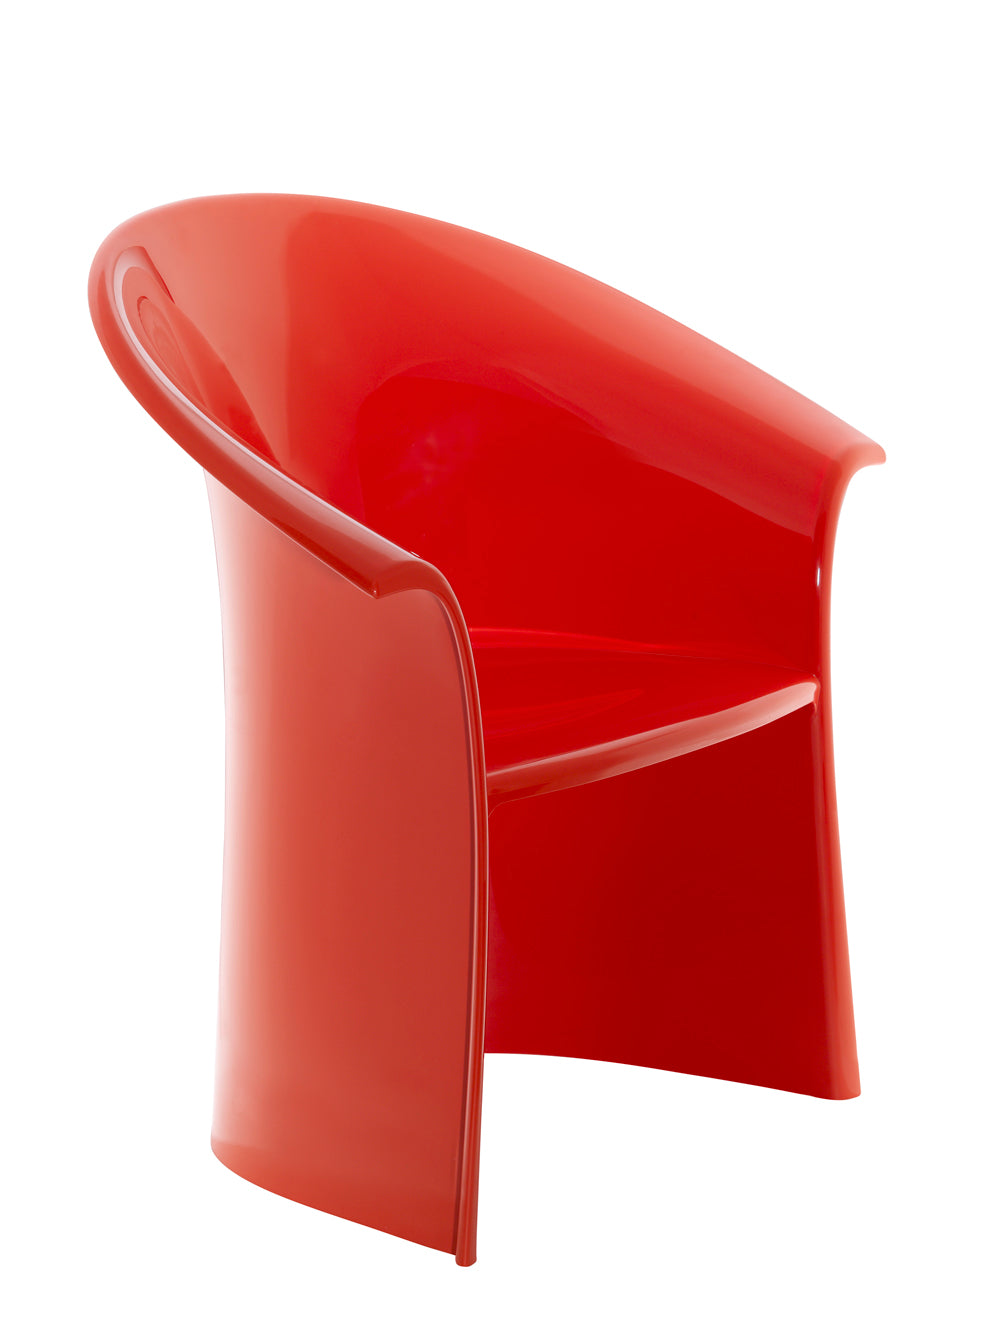 Vignelli Chair - Limited Edition